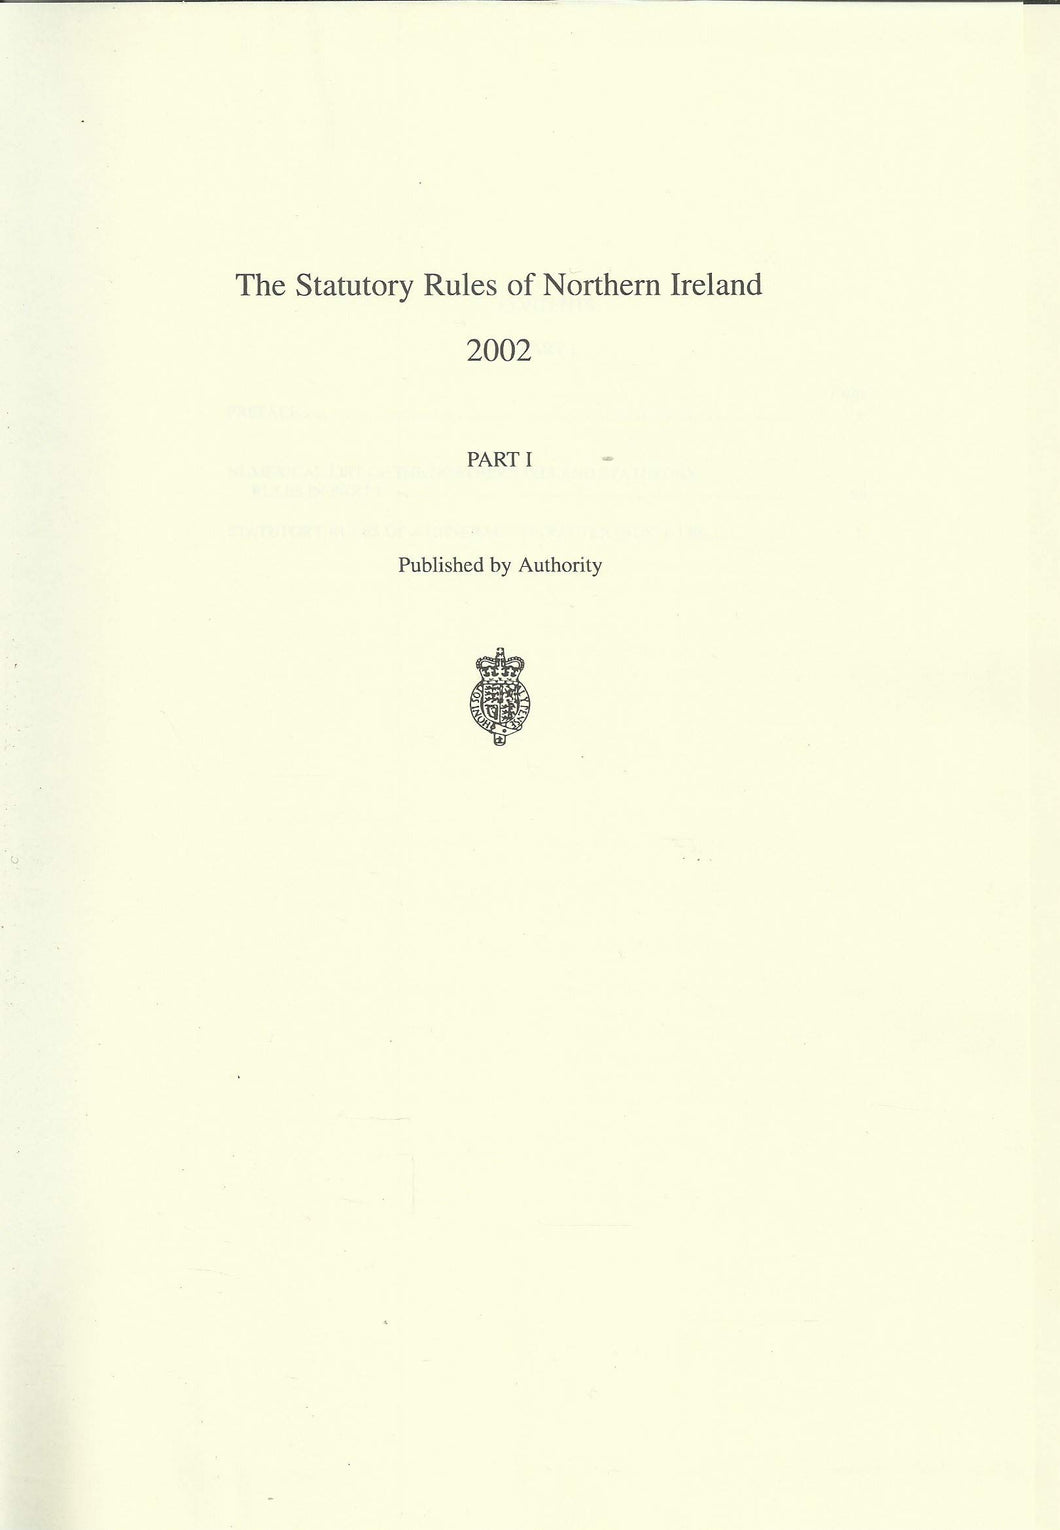 Statutory Rules of Northern Ireland 2002: Nos.1-150, Pages 1-880 Pt. 1